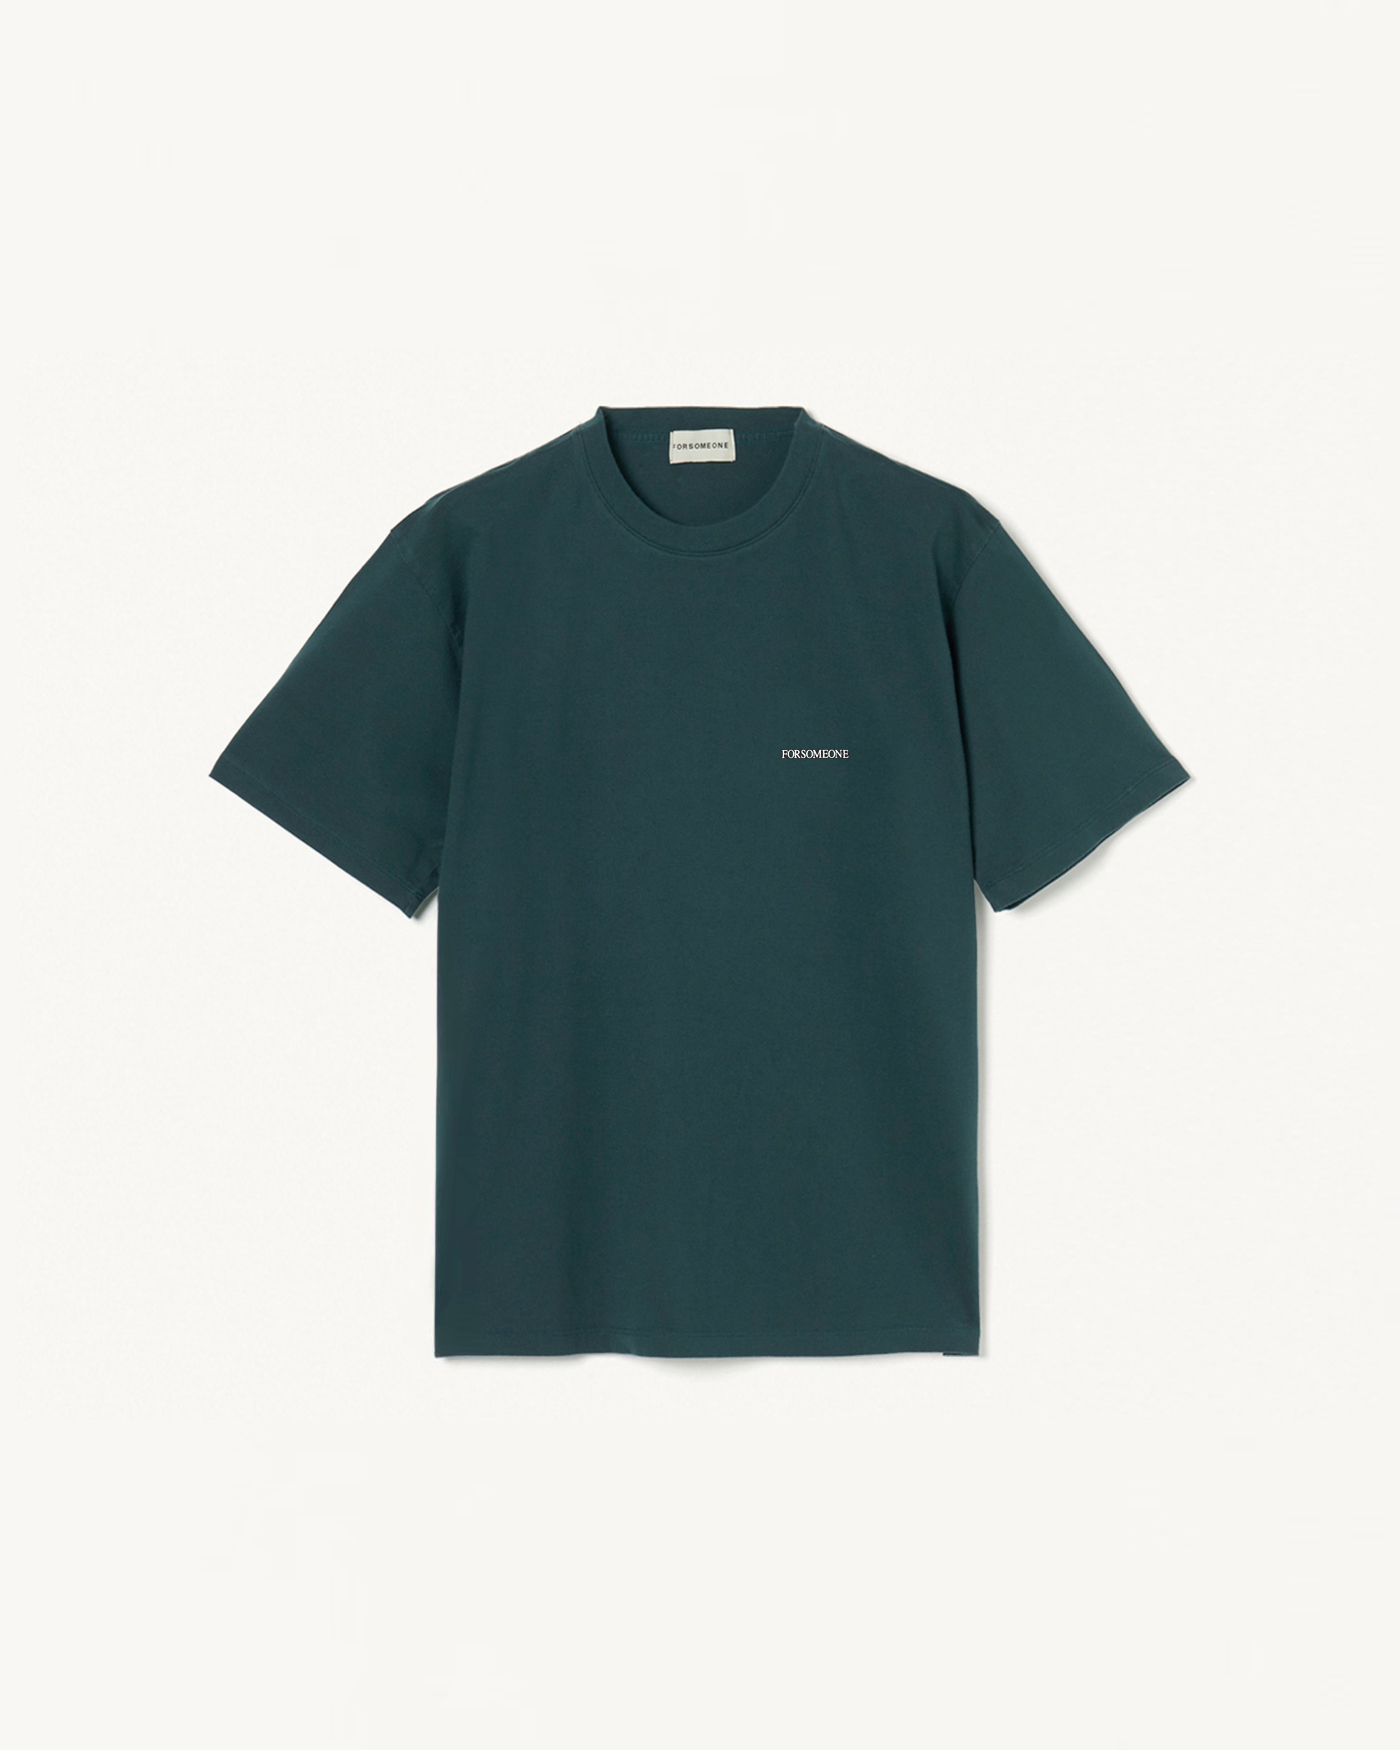 EAGLE TEE 詳細画像 Forest Green 4